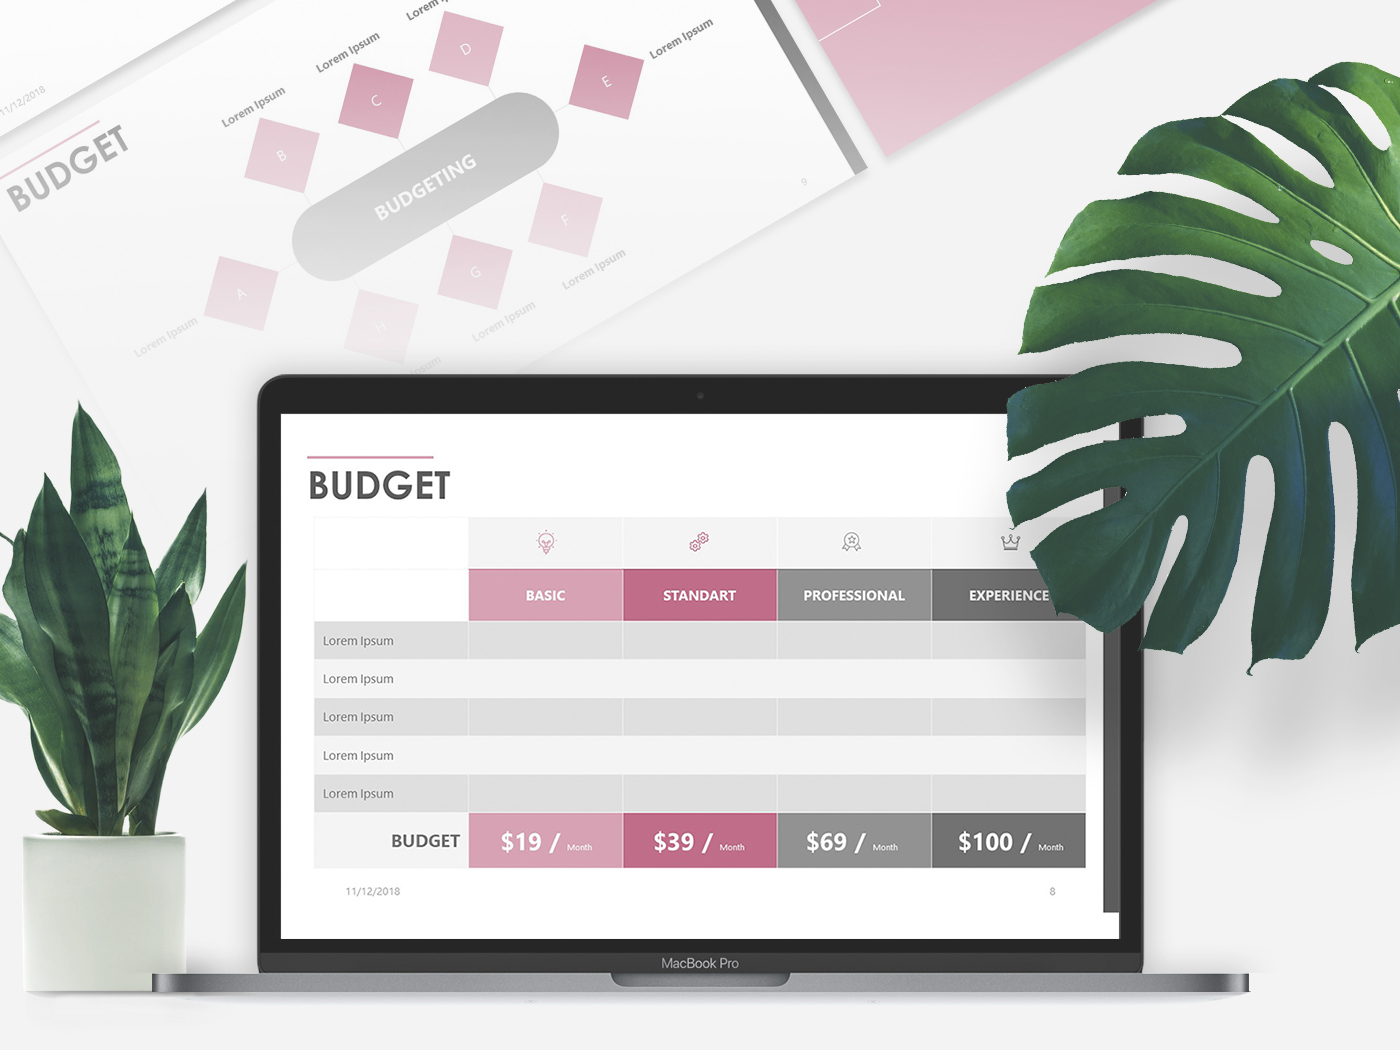 Budget Presentation Template Free Download by 24Slides on Dribbble